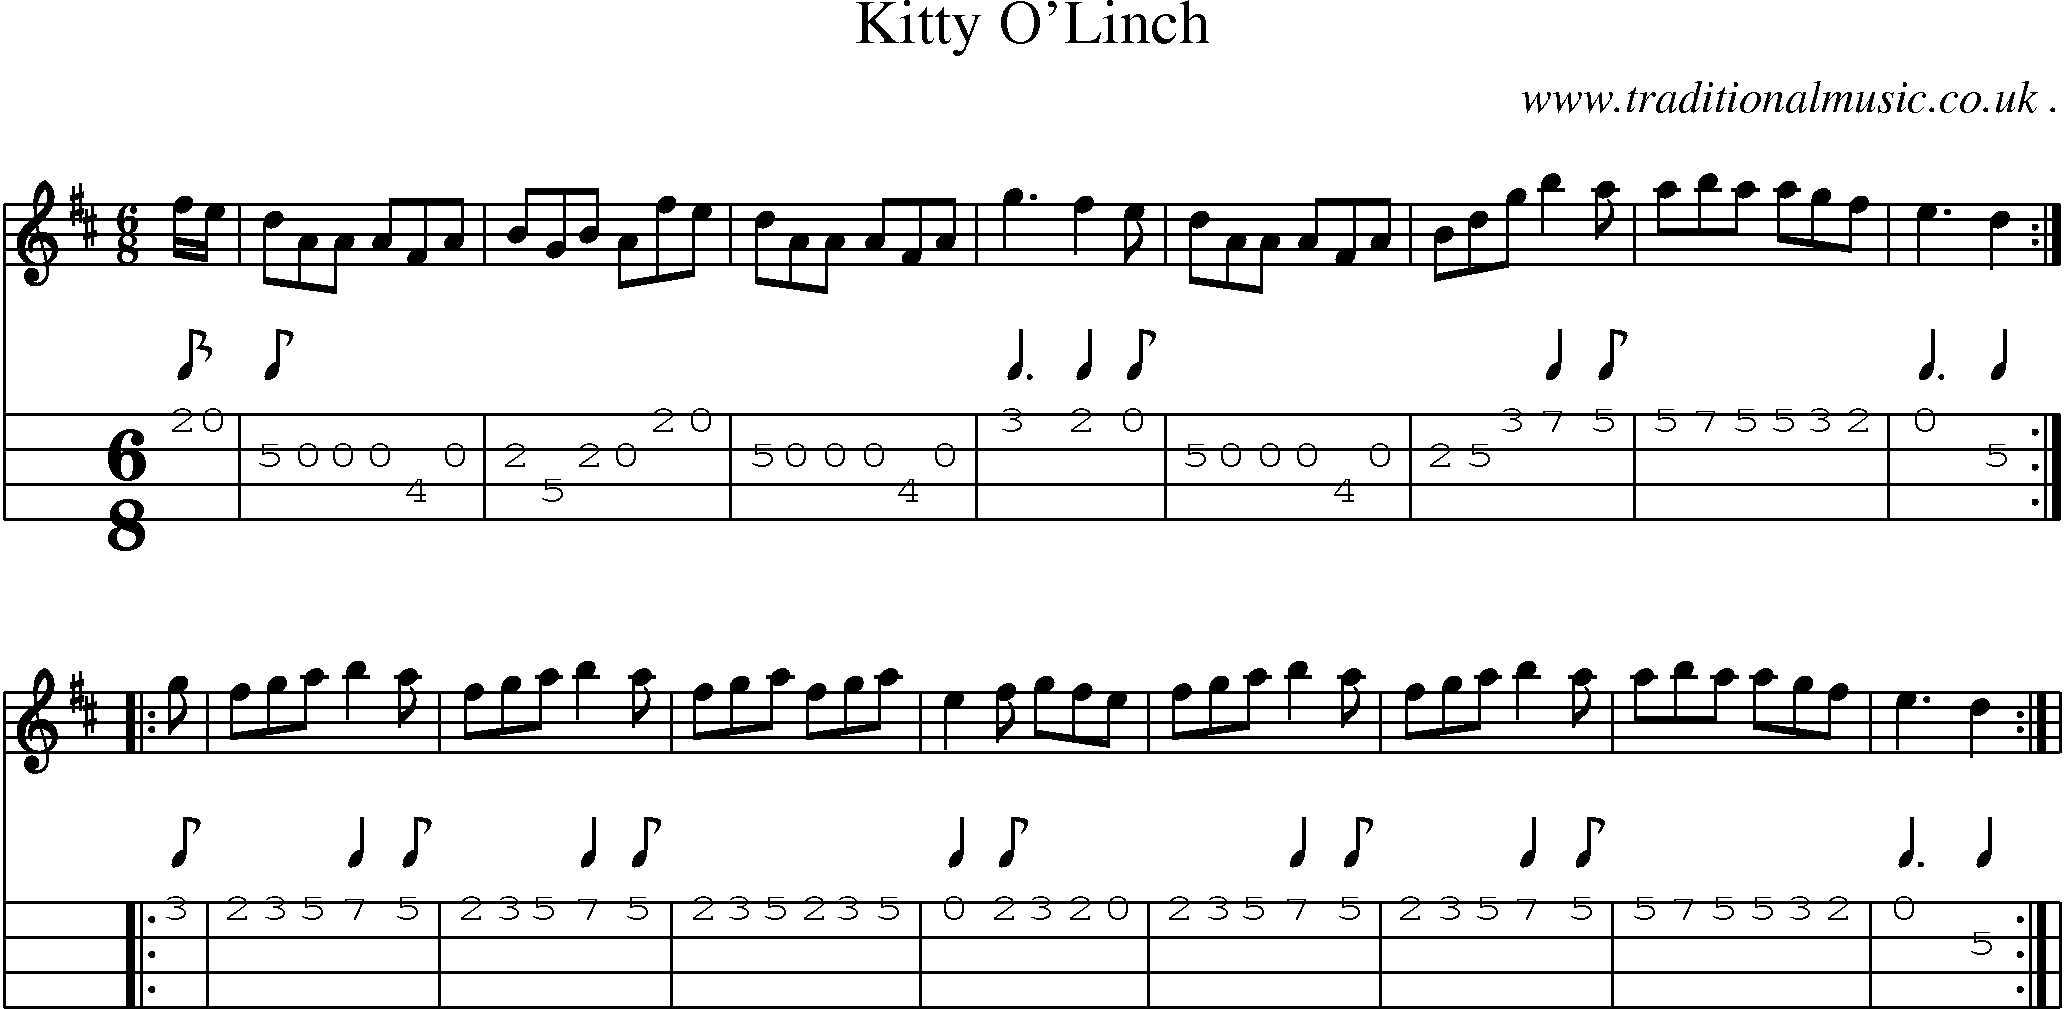 Sheet-Music and Mandolin Tabs for Kitty Olinch